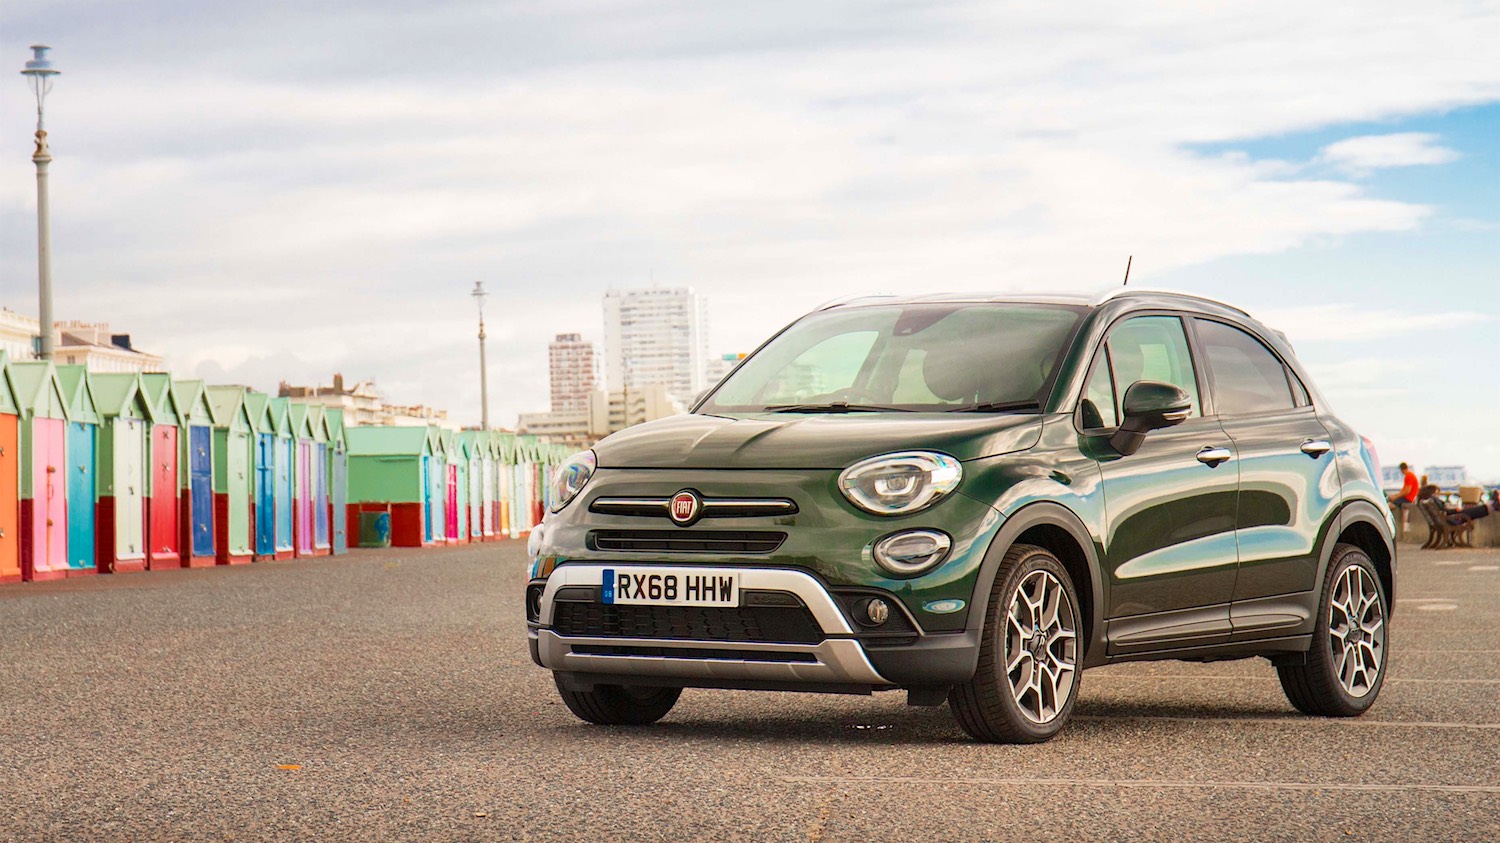 Tom Scanlan reviews the 2019 New Fiat 500x at the UK Launch 23